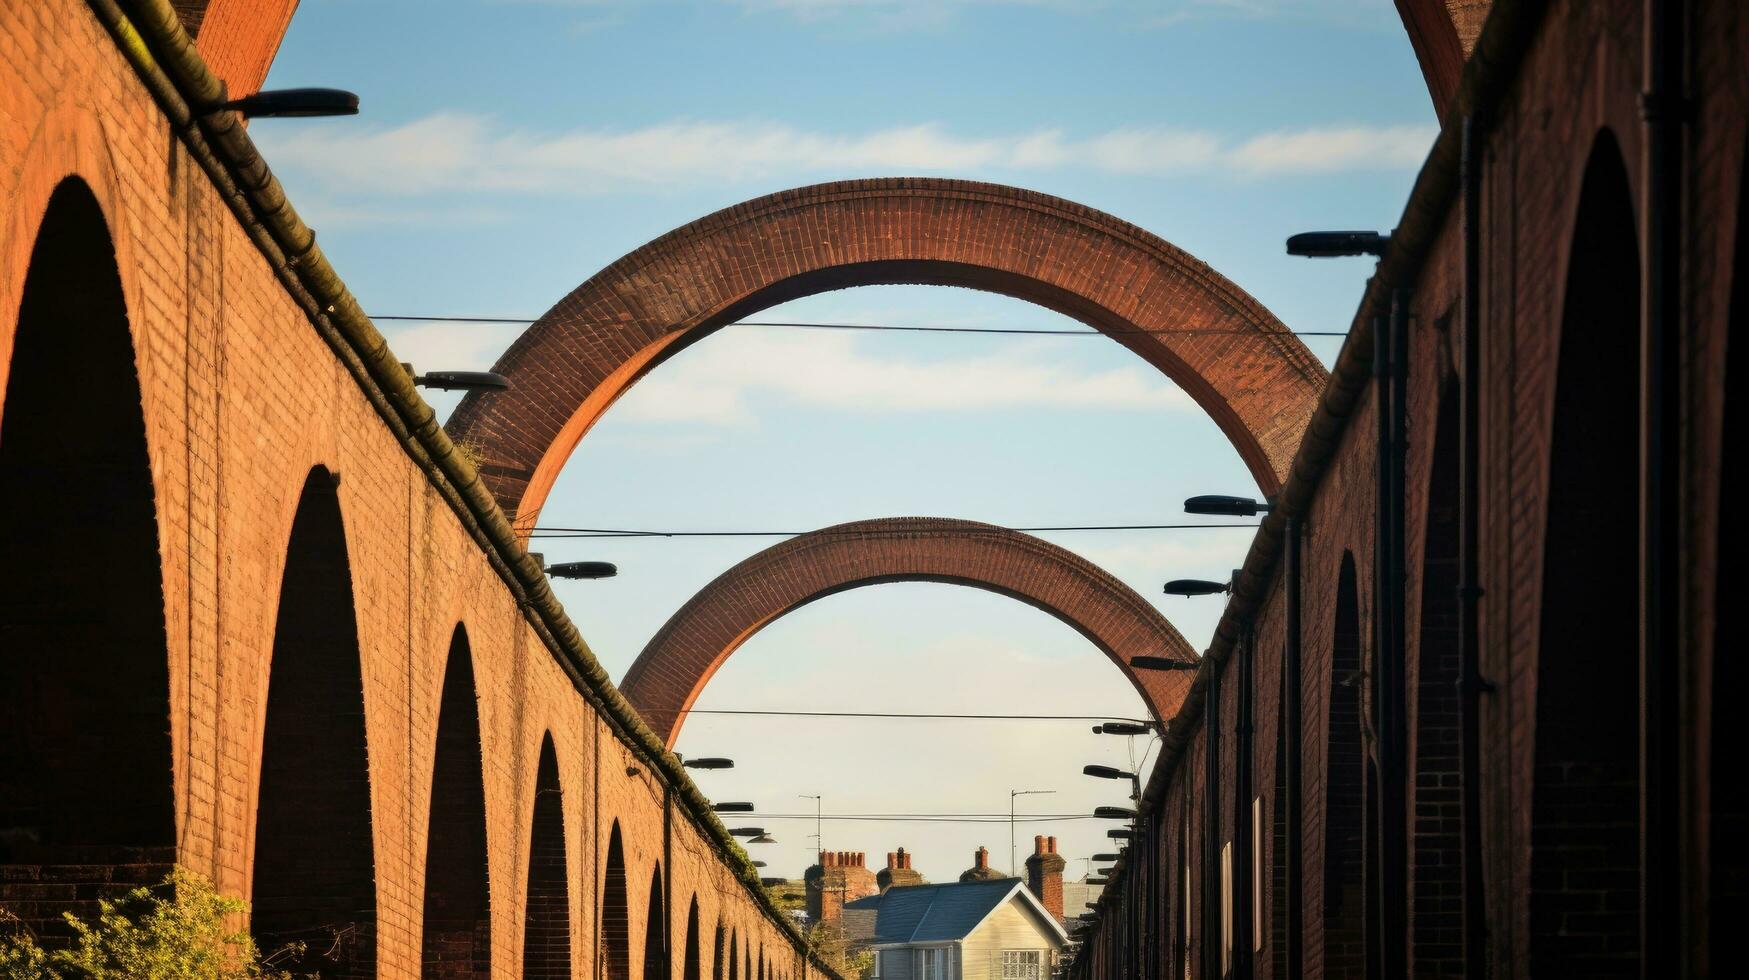 Chimney tops under railway bridge arches on homes below the red brick train arches silhouetted on a sunny day in Mansfield town Nottinghamshire photo